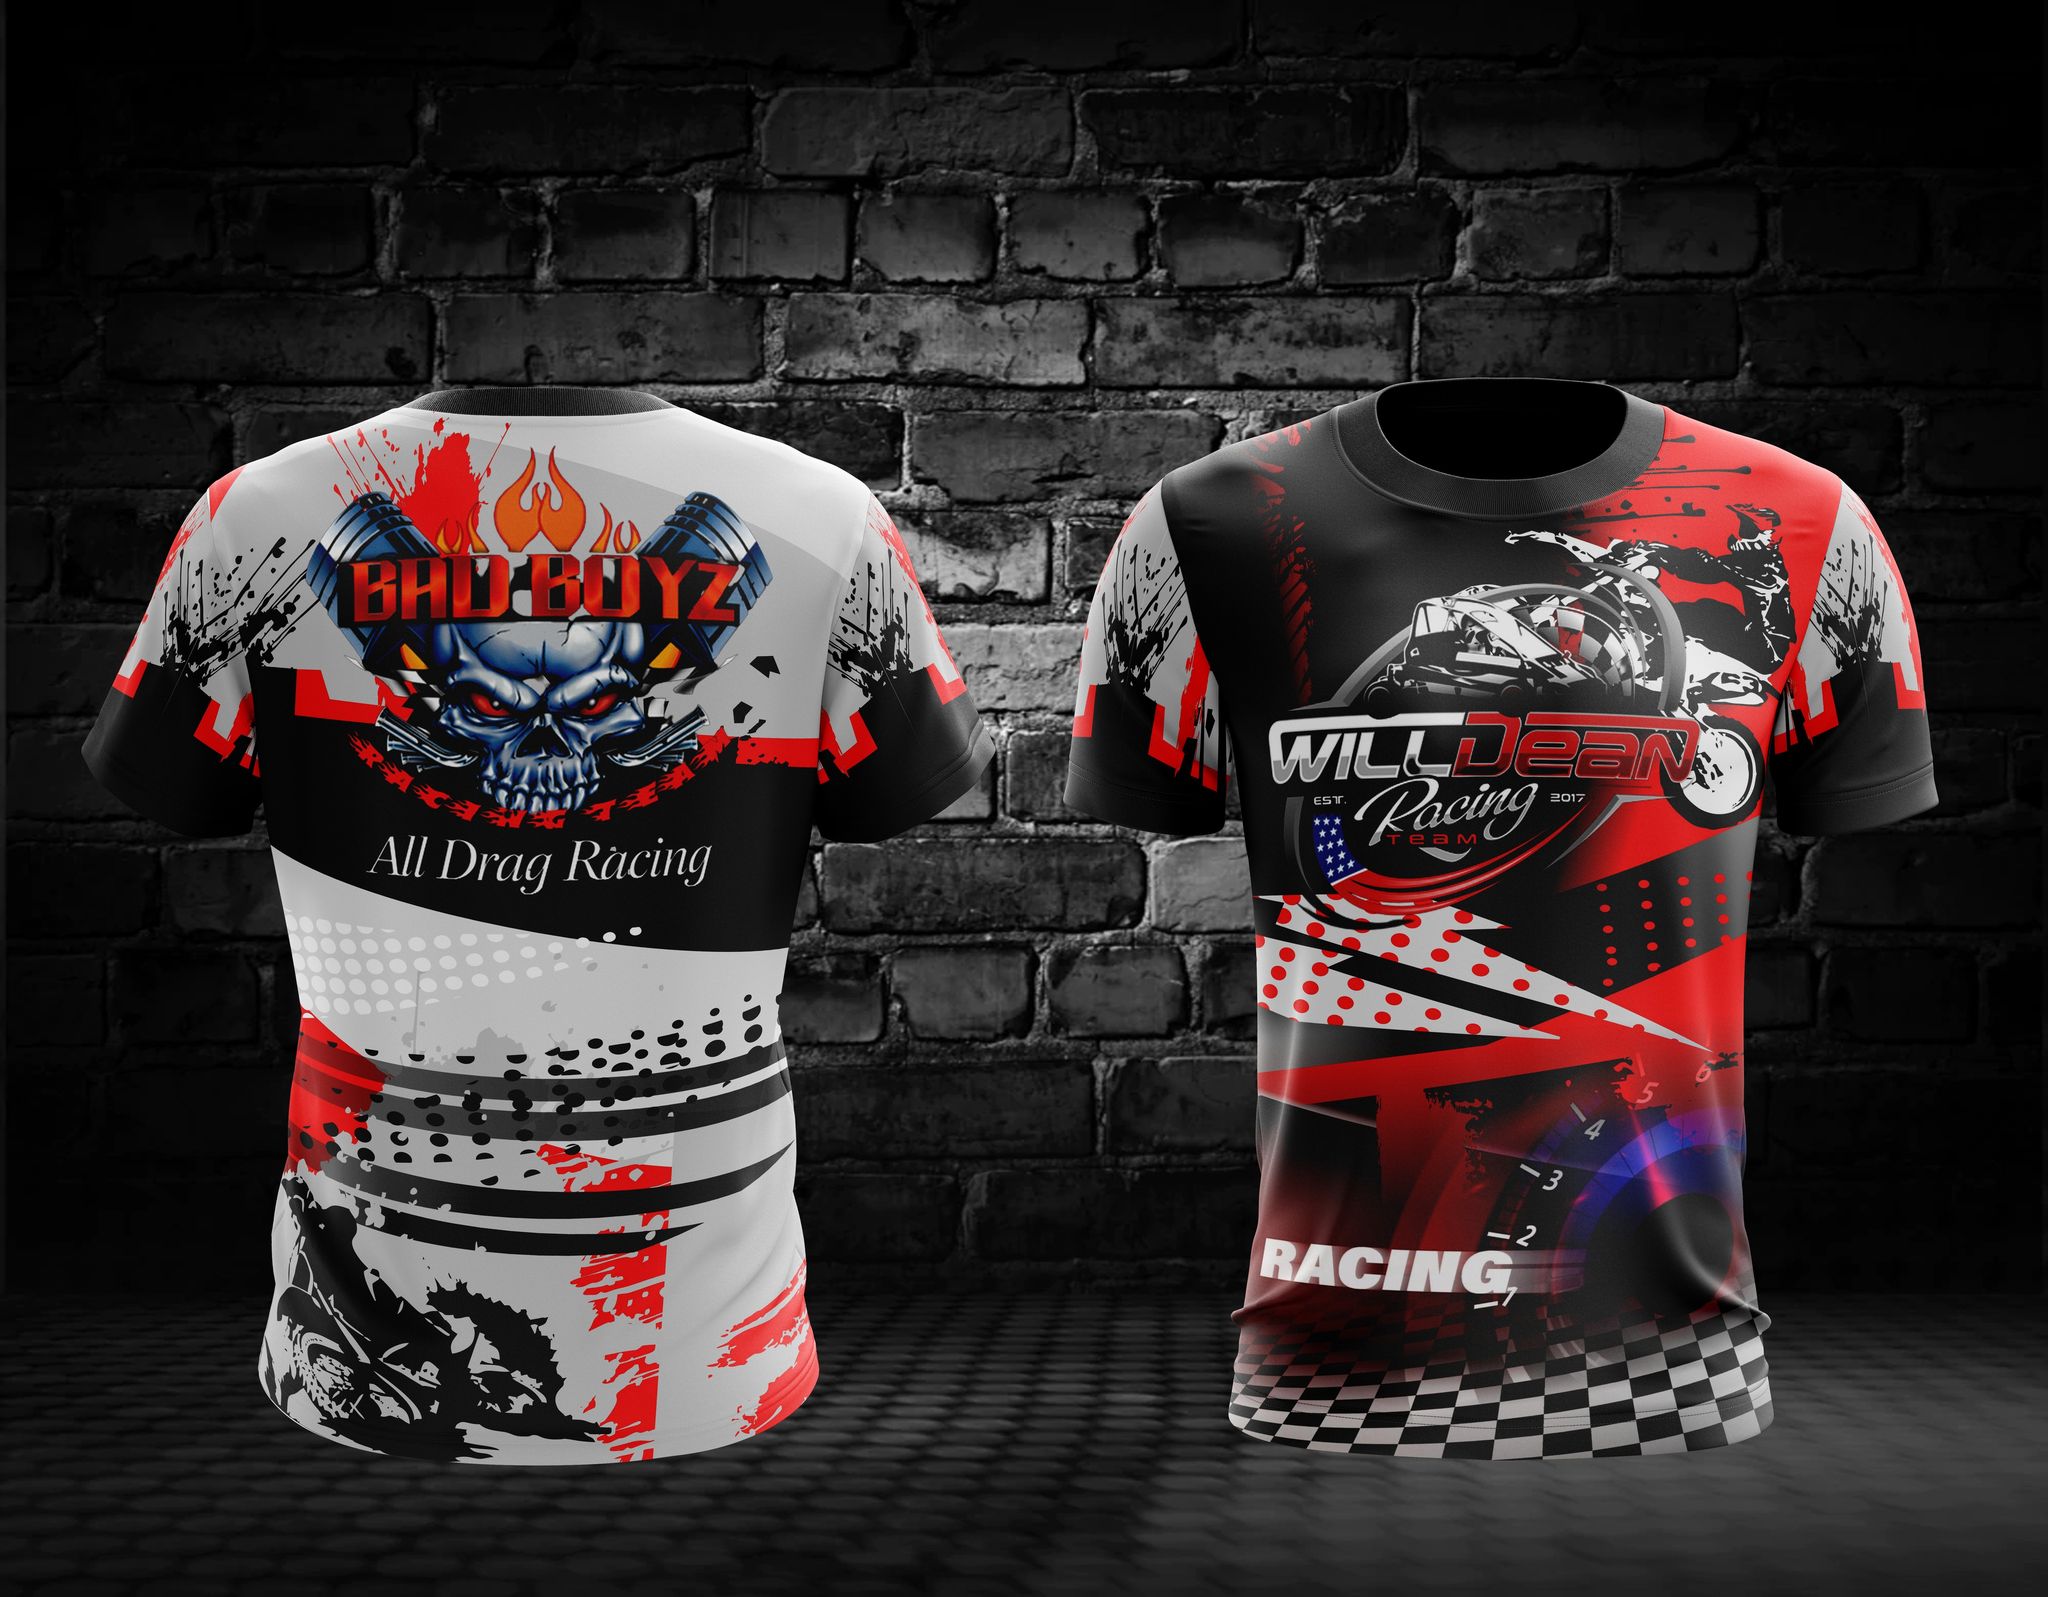 badboyz-01-willdean-racing-t-shirt-free-customize-of-name-number-only